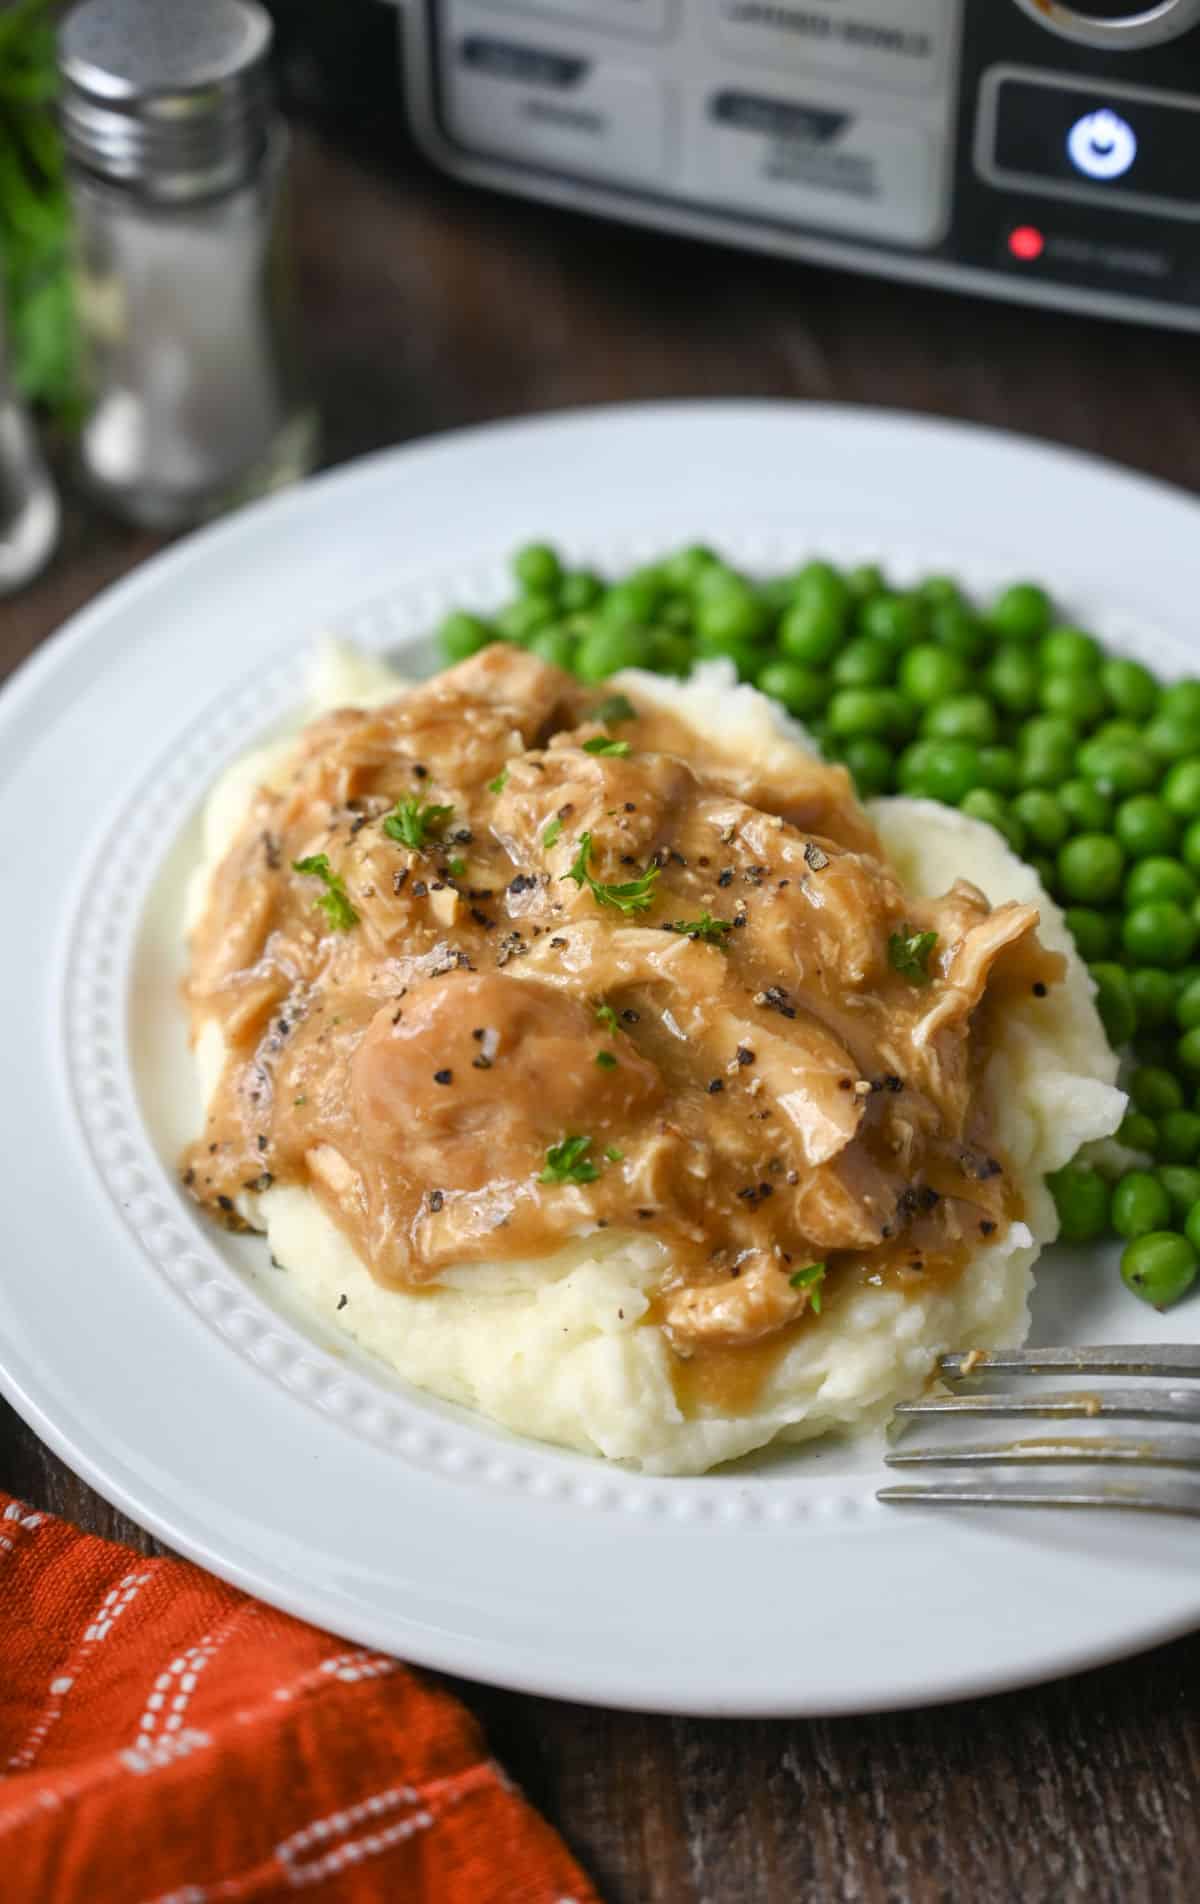 Slow cooker chicken and gravy on mashed potatoes and a side of green peas.